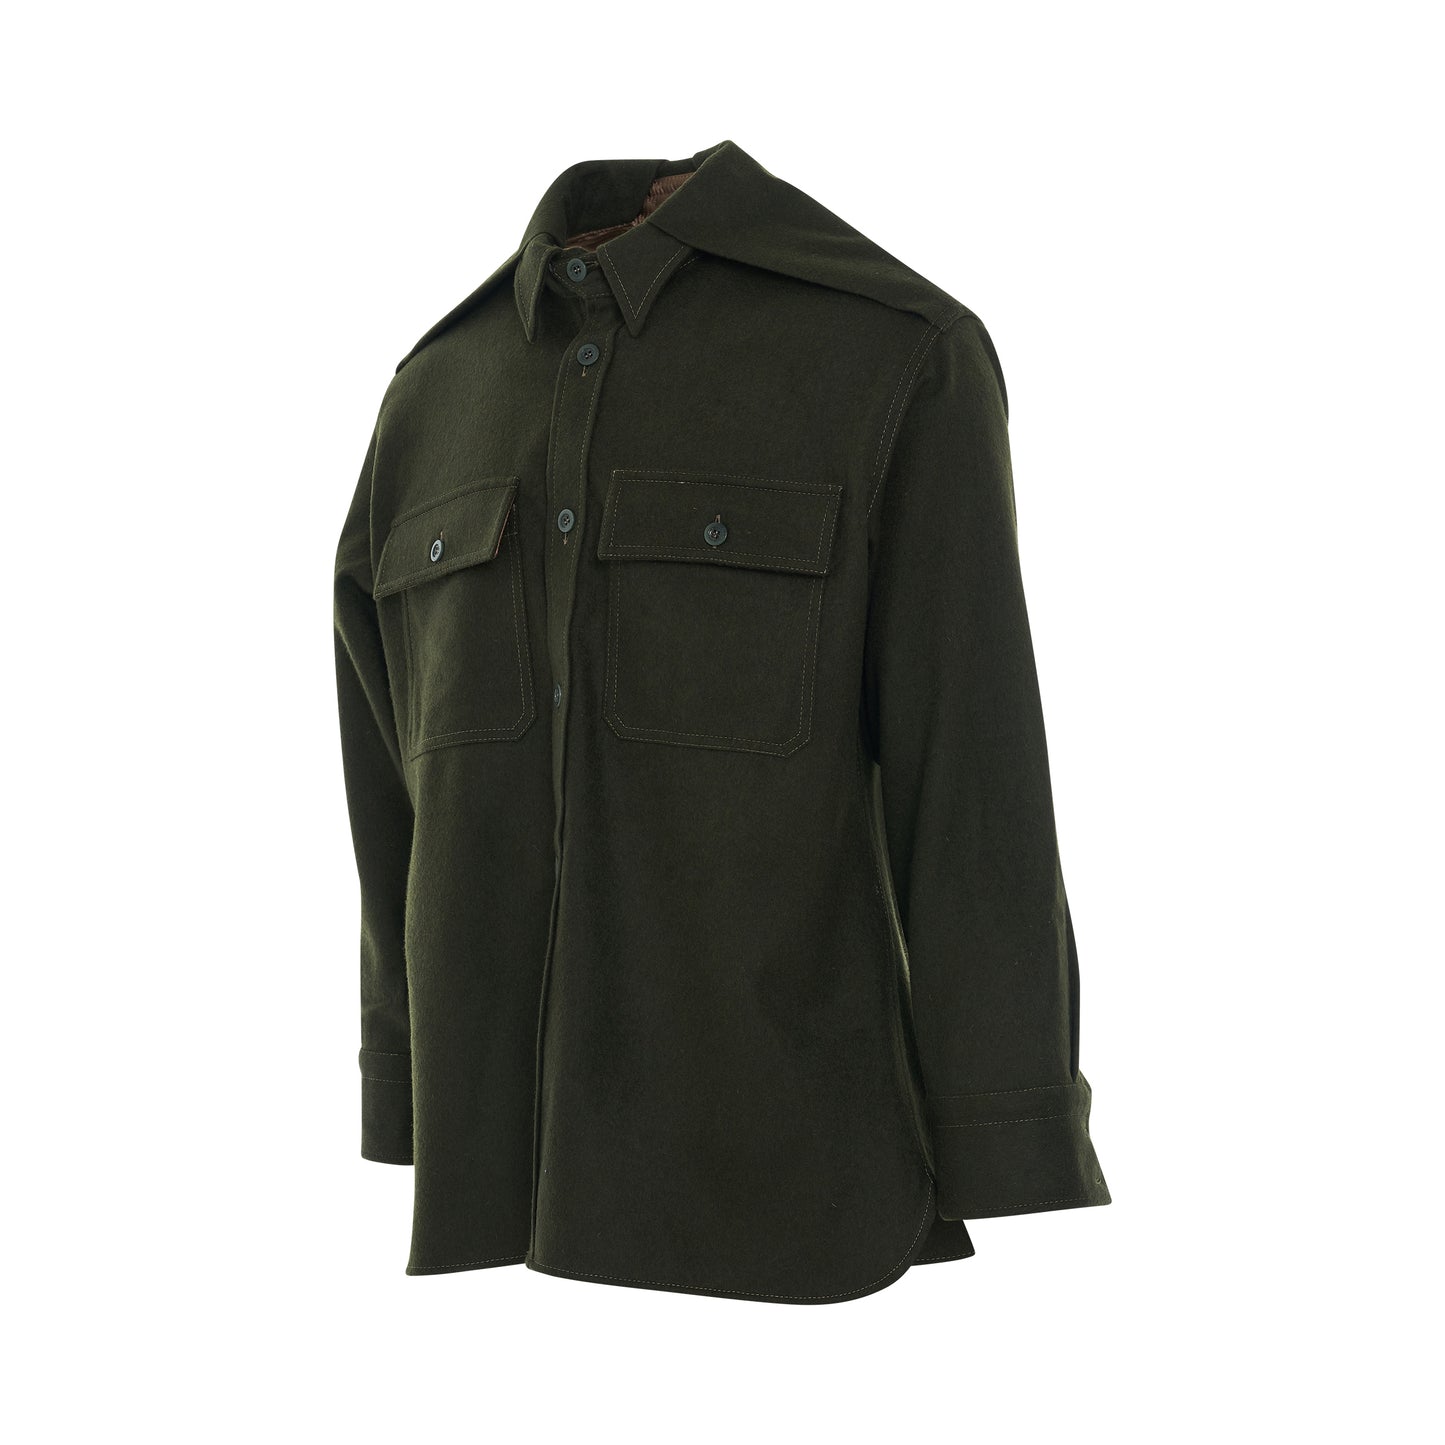 Stitched Wool Shirt in Olive Green